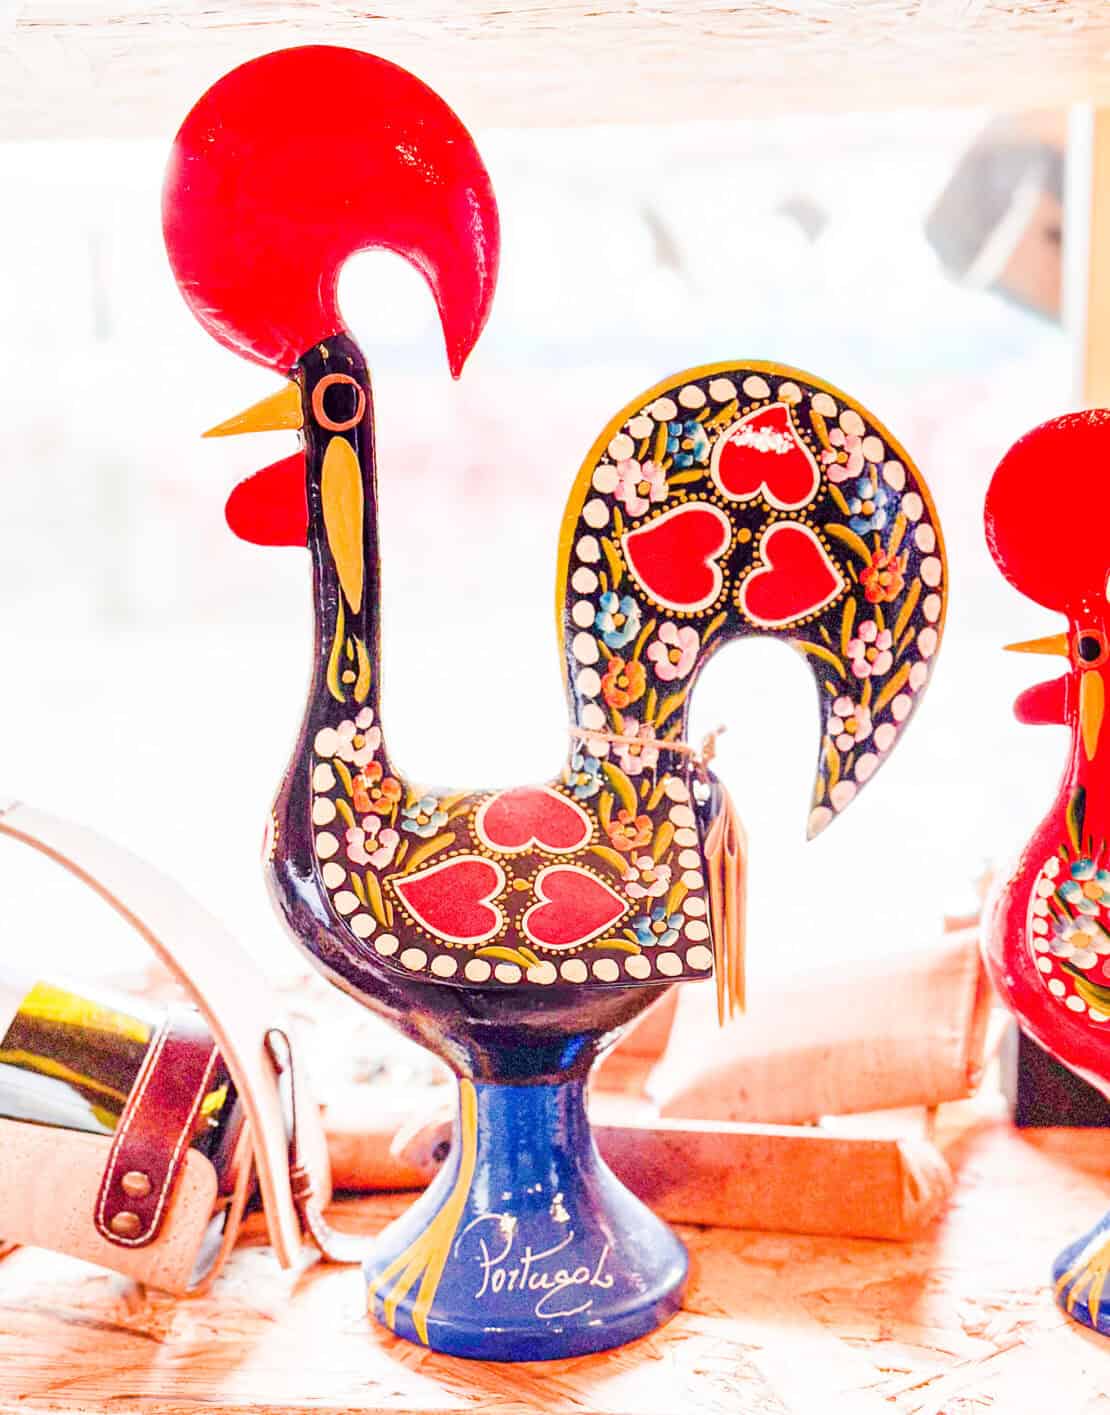 Single galo de barcelos rooster souvenir with Portugal written on the base